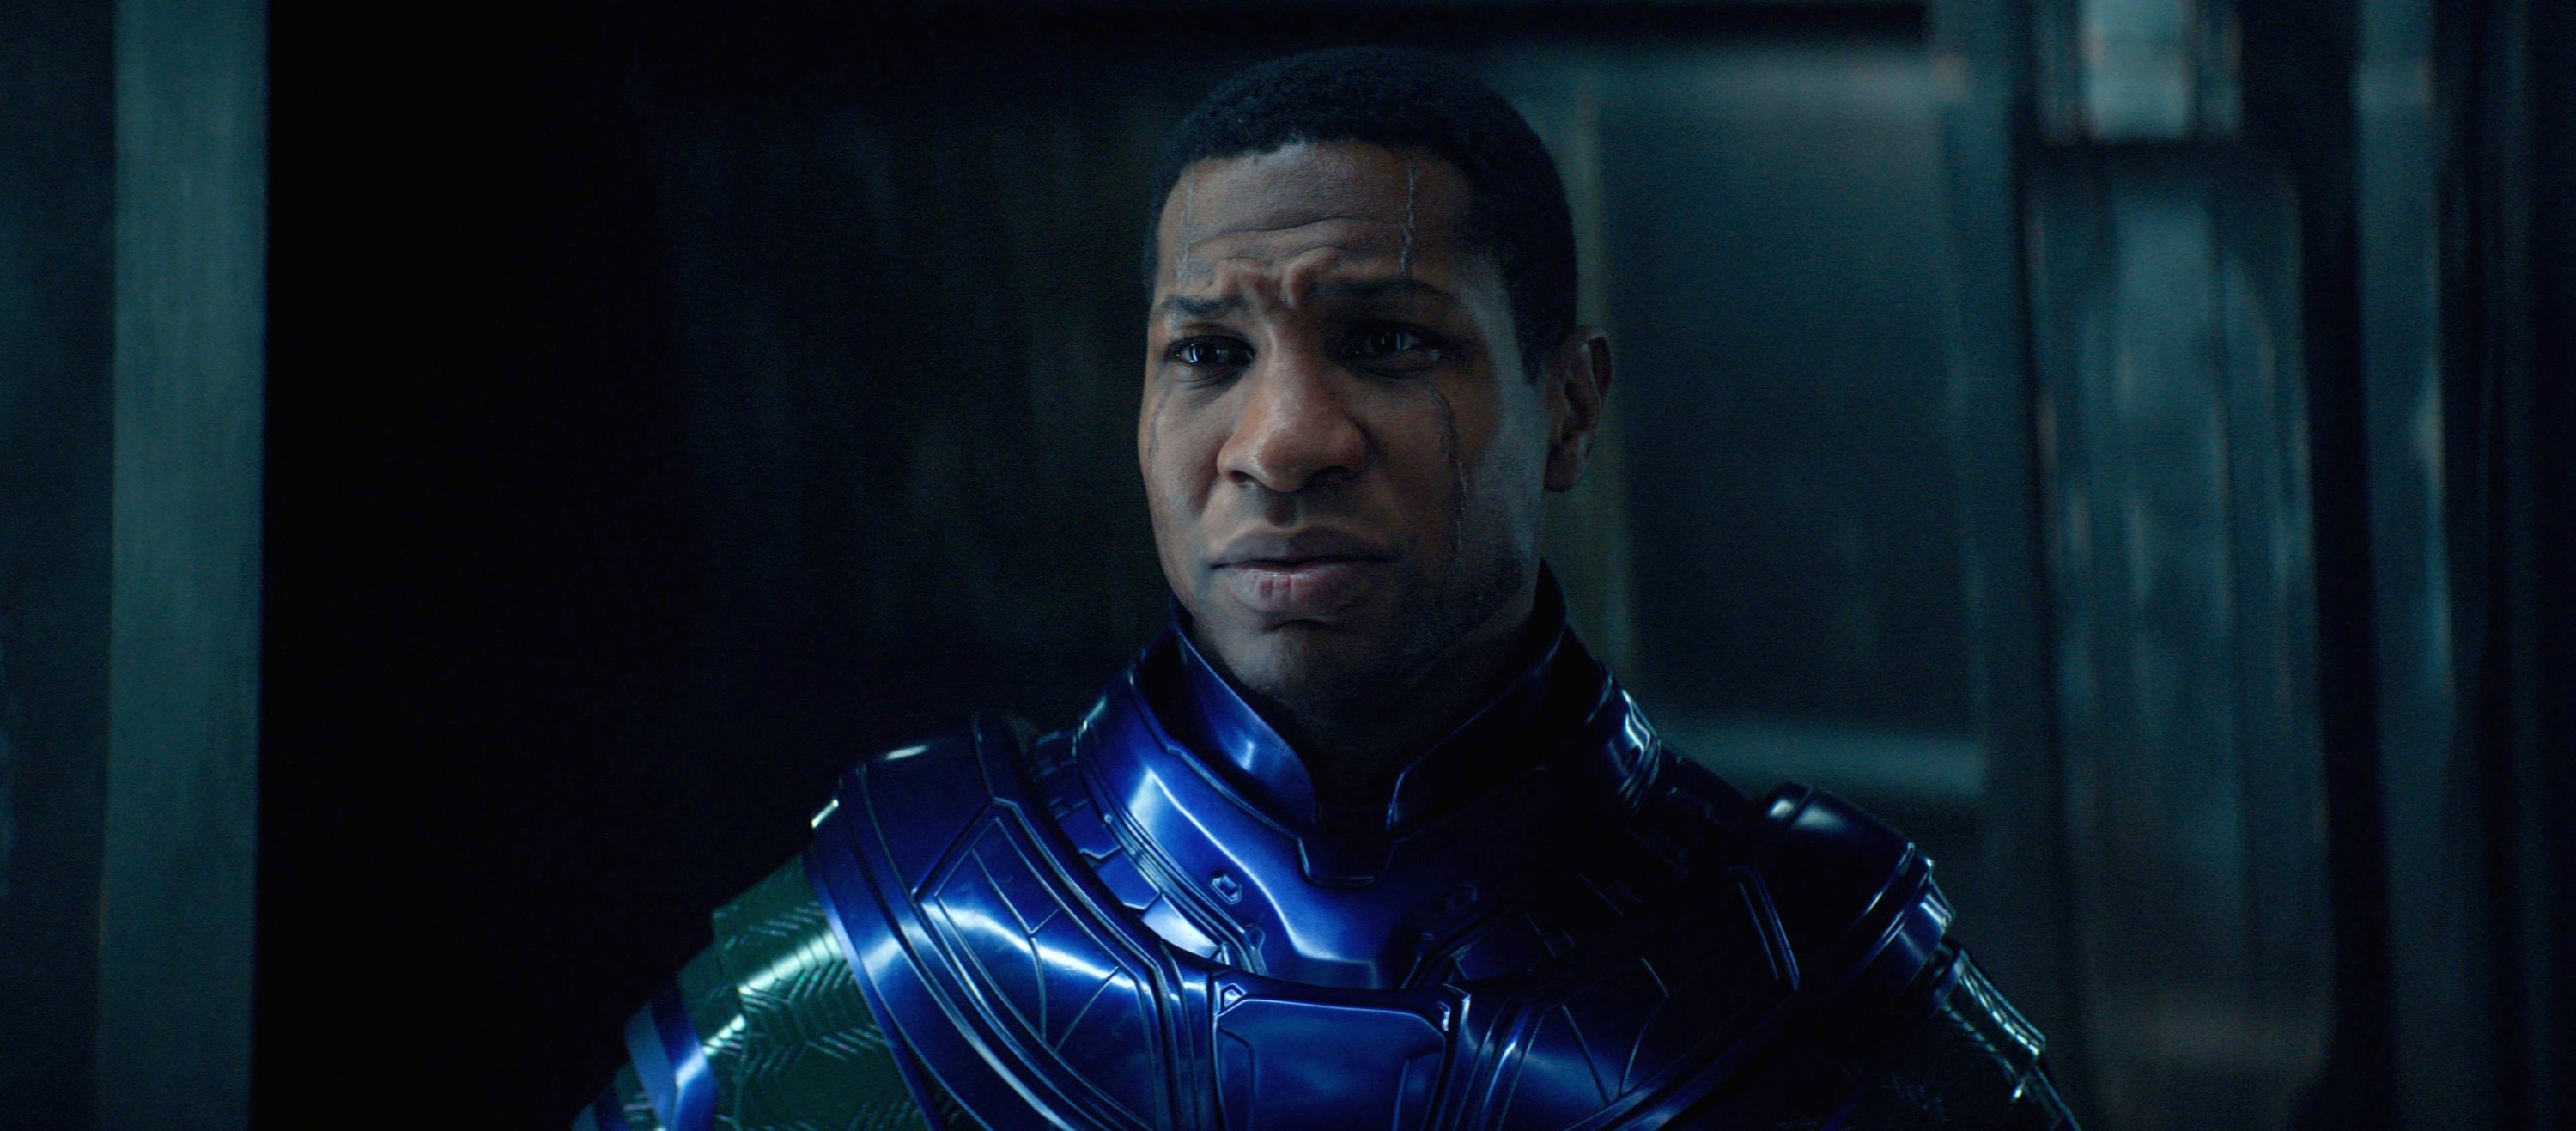 Jonathan Majors, as Kang the Conqueror, wearing futuristic, metallic armor from a scene in a film